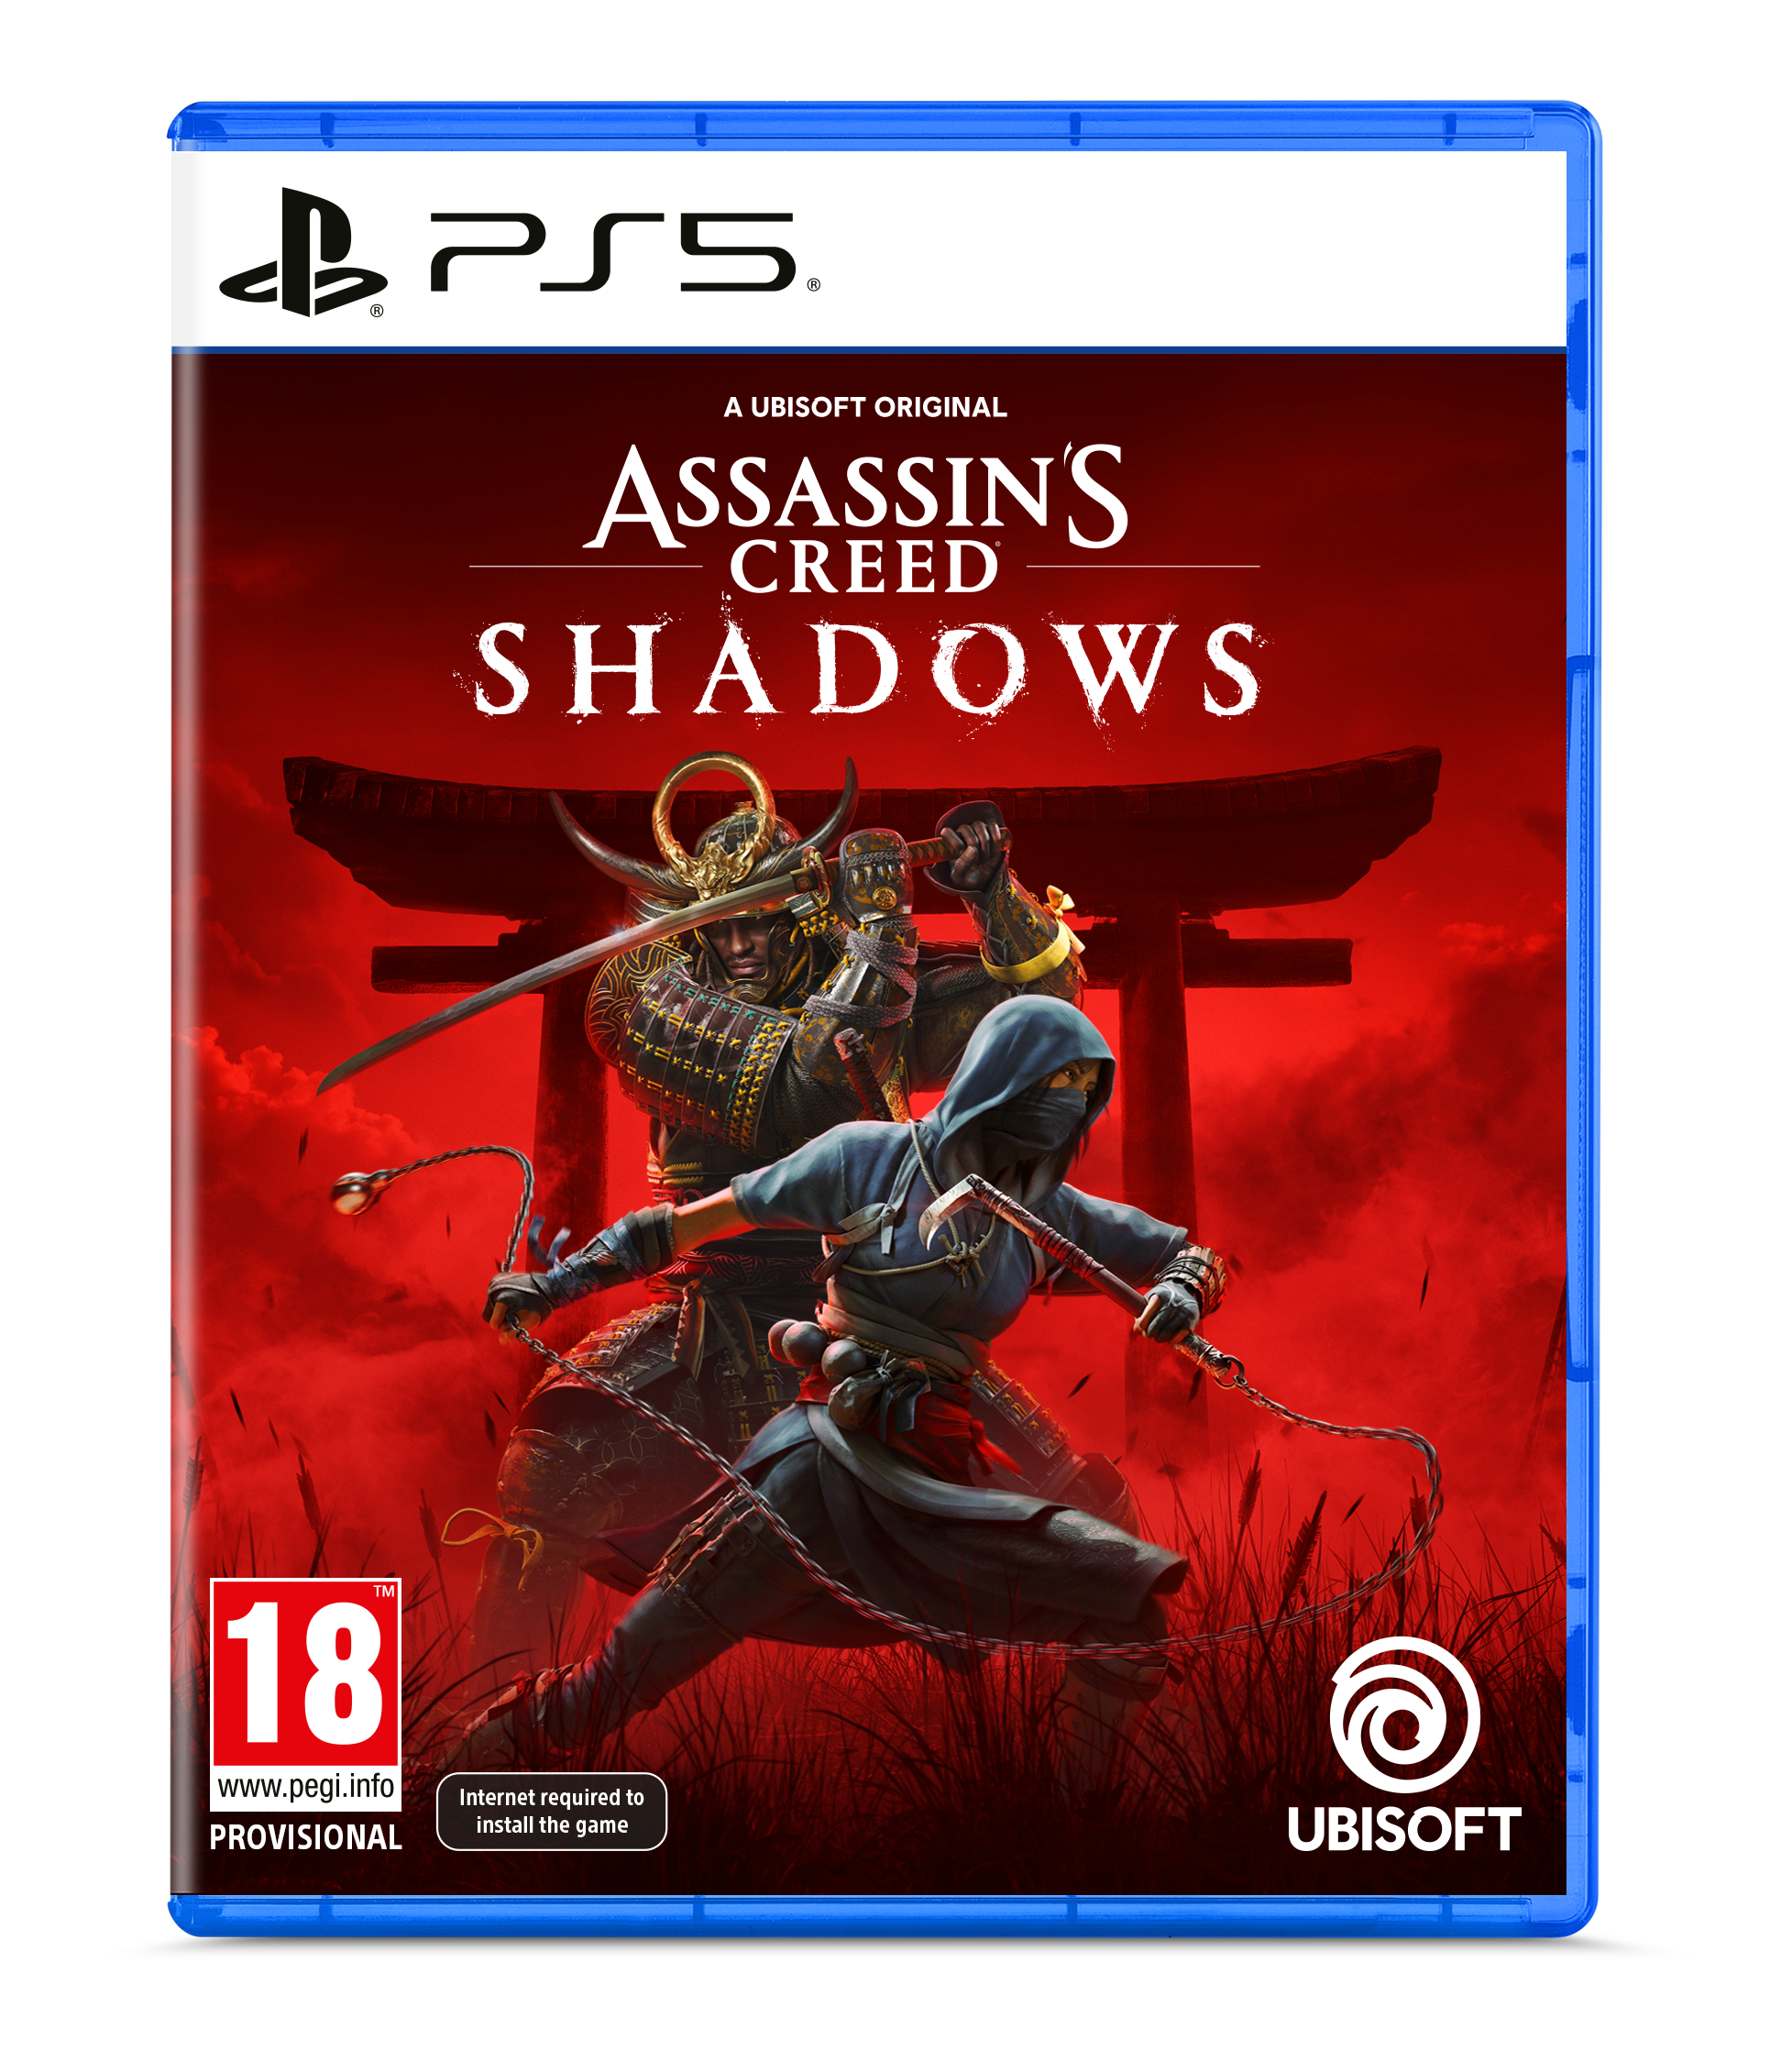 ASSASSINS CREED SHADOWS SPECIAL EDITION (PS5)